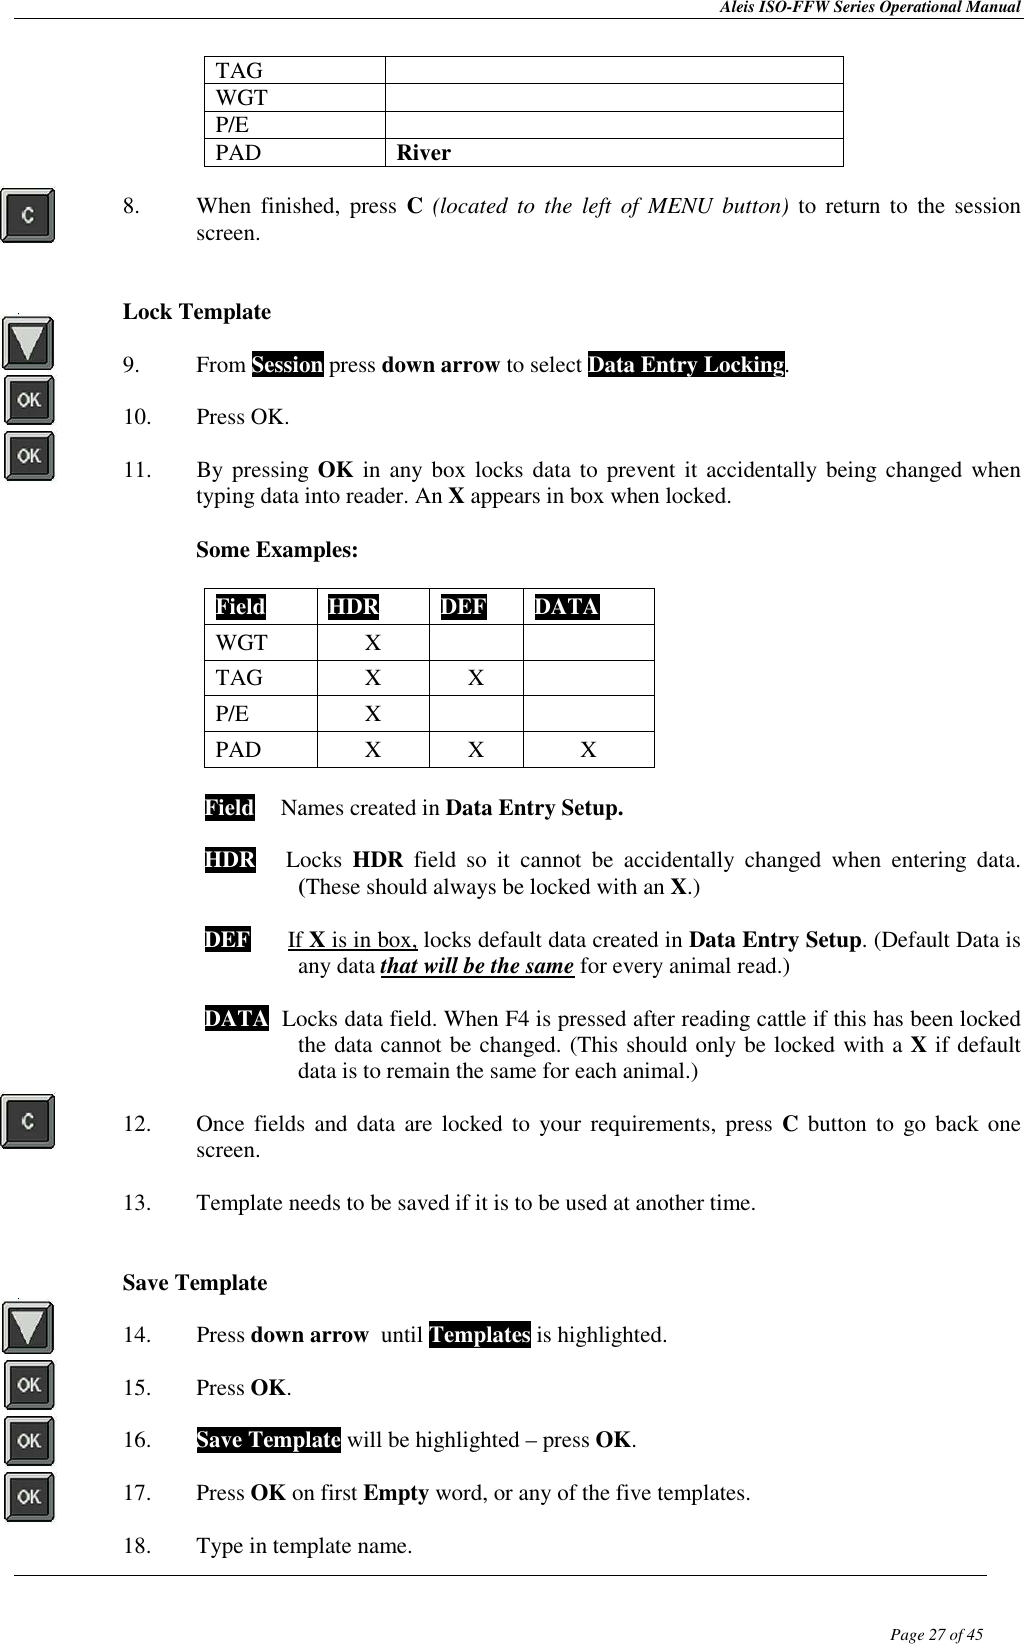 Aleis ISO-FFW Series Operational Manual  Page 27 of 45 TAG   WGT   P/E   PAD  River  8. When  finished,  press  C (located  to  the  left  of  MENU  button)  to  return to  the  session screen.   Lock Template  9. From Session press down arrow to select Data Entry Locking.  10. Press OK.  11. By pressing OK in  any box locks  data to  prevent  it accidentally being changed when typing data into reader. An X appears in box when locked.   Some Examples:  Field  HDR  DEF  DATA WGT  X   TAG  X  X   P/E  X   PAD  X  X  X  Field  TNames created in Data Entry Setup.  HDR      Locks  HDR  field  so  it  cannot  be  accidentally  changed  when  entering  data.   (These should always be locked with an X.) This sho DEF      If X is in box, locks default data created in Data Entry Setup. (Default Data is   any data that will be the same for every animal read.)   DATA  Locks data field. When F4 is pressed after reading cattle if this has been locked the data cannot be changed. (This should only be locked with a X if default data is to remain the same for each animal.)  12. Once  fields  and data  are locked  to your  requirements,  press C  button  to  go back one screen.  13. Template needs to be saved if it is to be used at another time.   Save Template  14. Press down arrow  until Templates is highlighted.  15. Press OK.  16. Save Template will be highlighted – press OK.  17. Press OK on first Empty word, or any of the five templates.  18. Type in template name. 